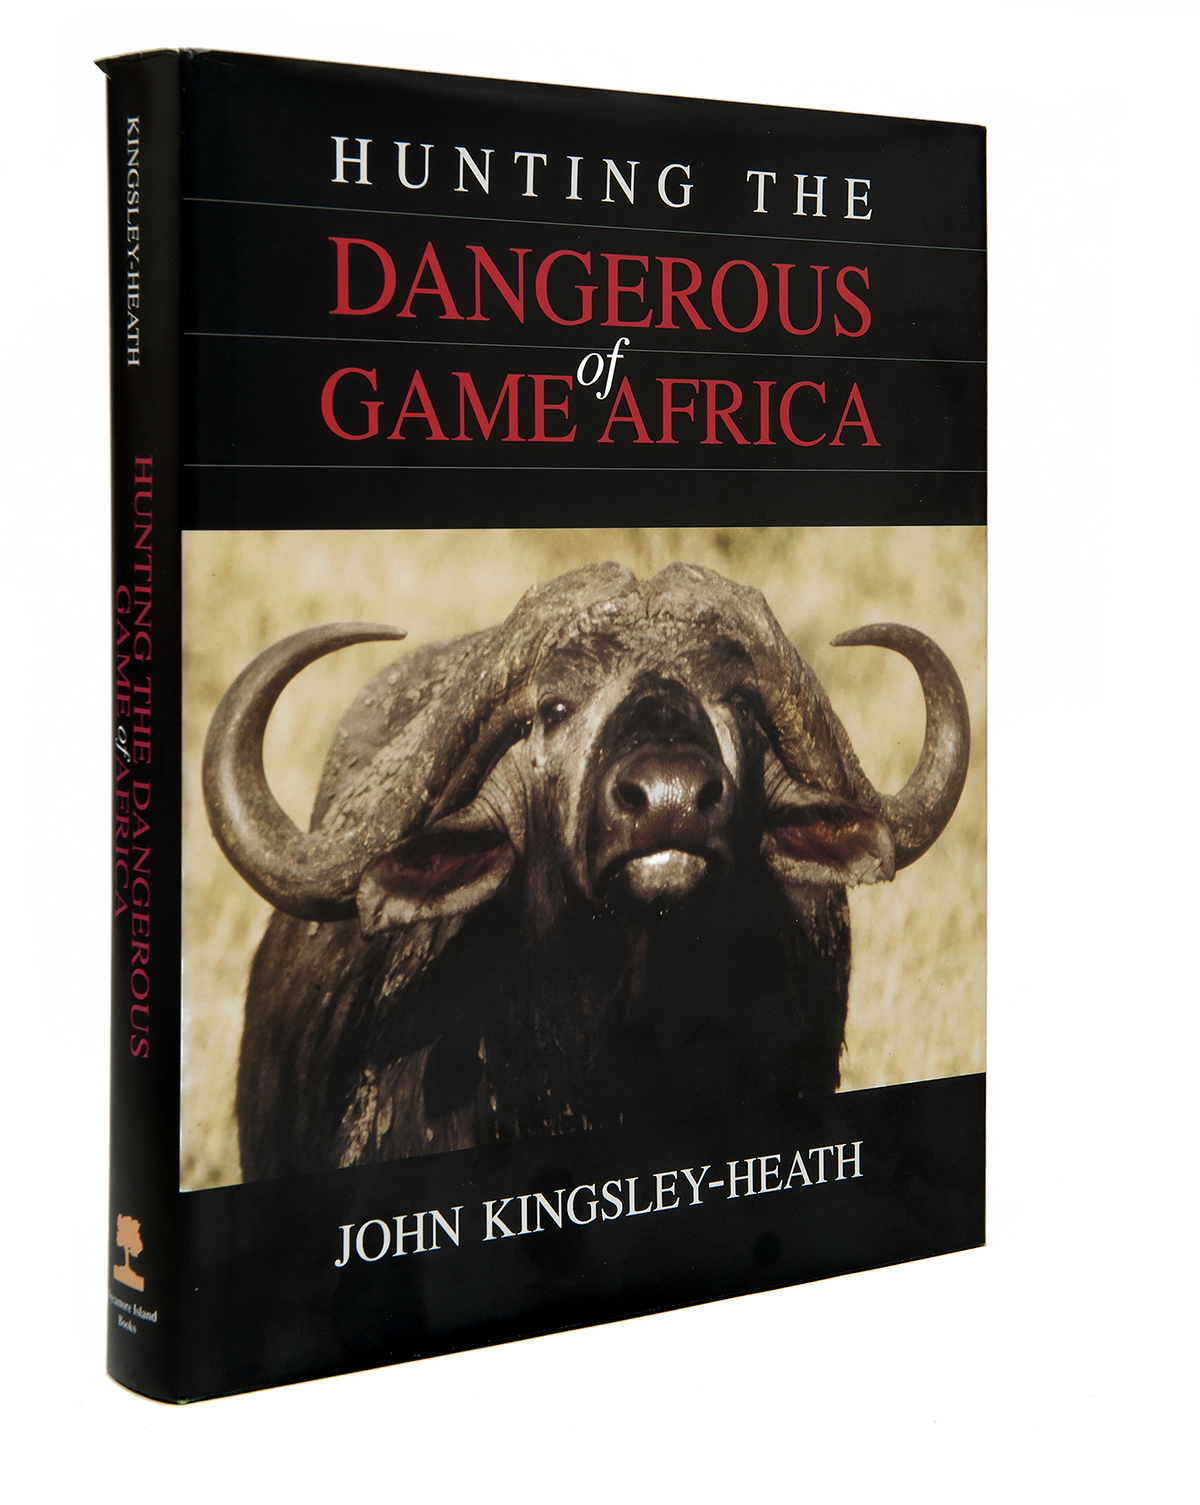 HUNTING THE DANGEROUS GAME OF AFRICA' BY JOHN KINGSLEY-HEATH, a rare copy of 30 years of John